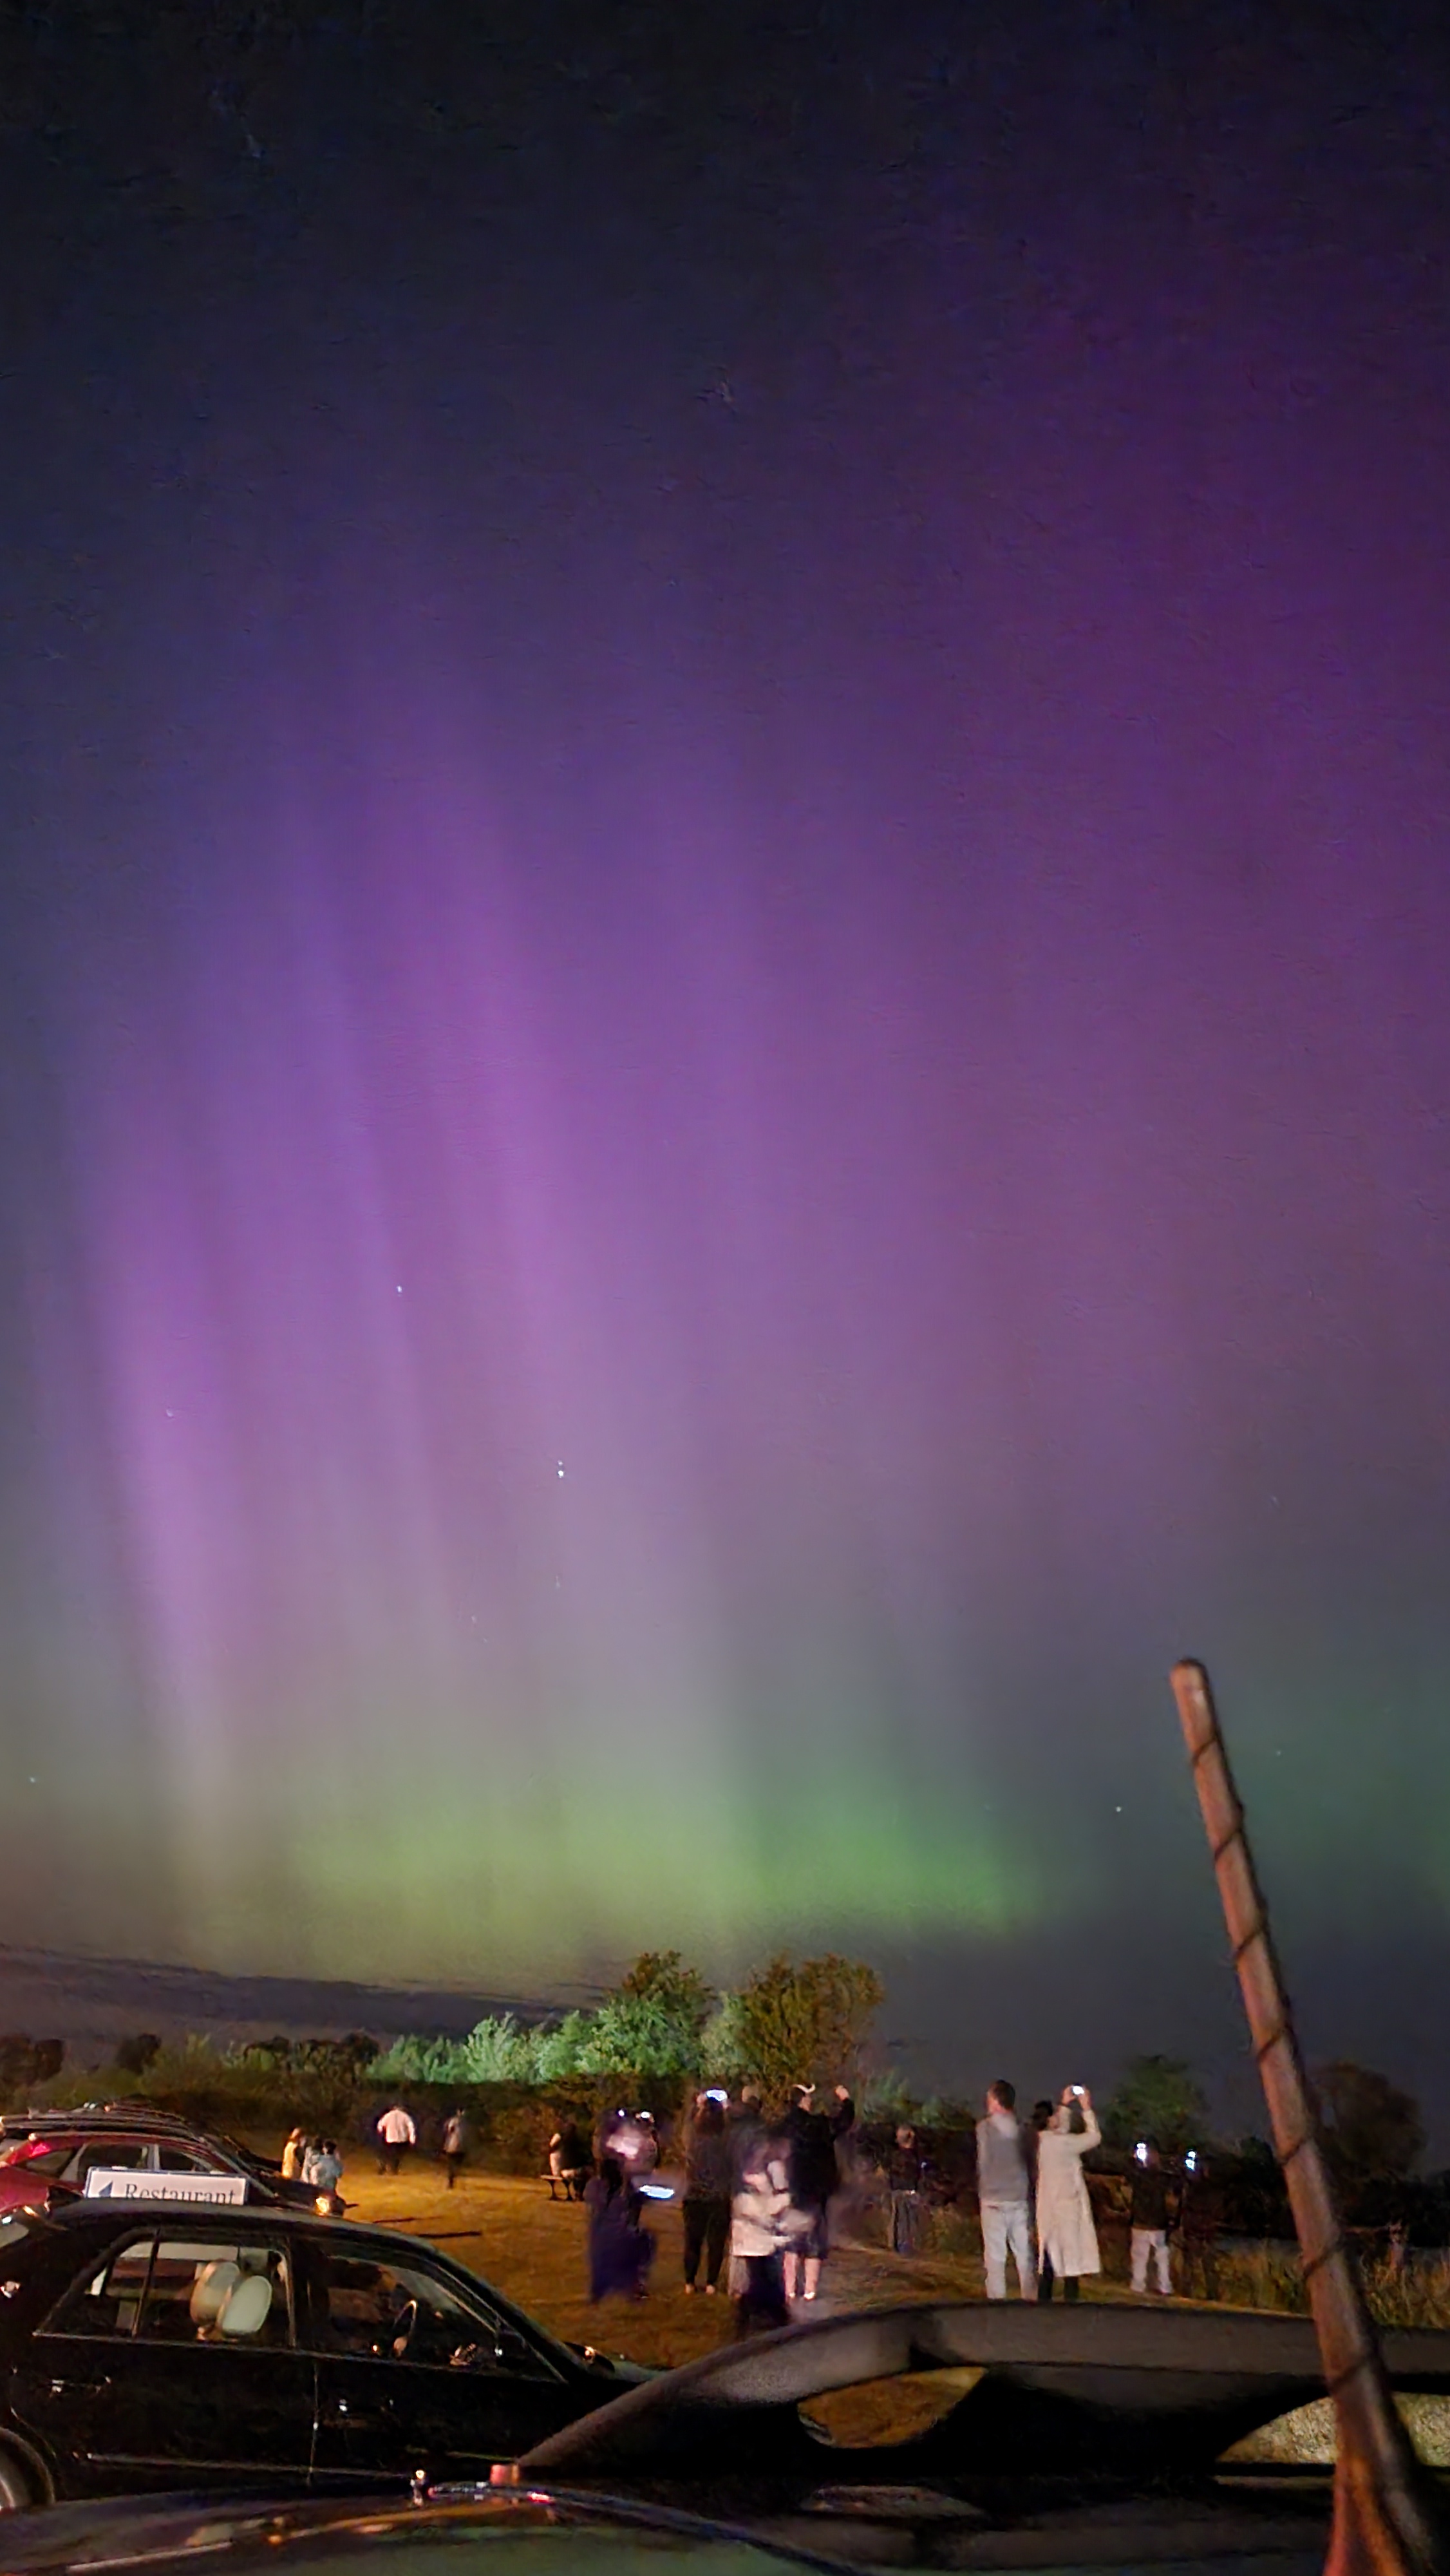 Aurora borealis as seen from Lakeside Landing in Lorain OH. Beautiful purple and green curtain over Lake Erie.